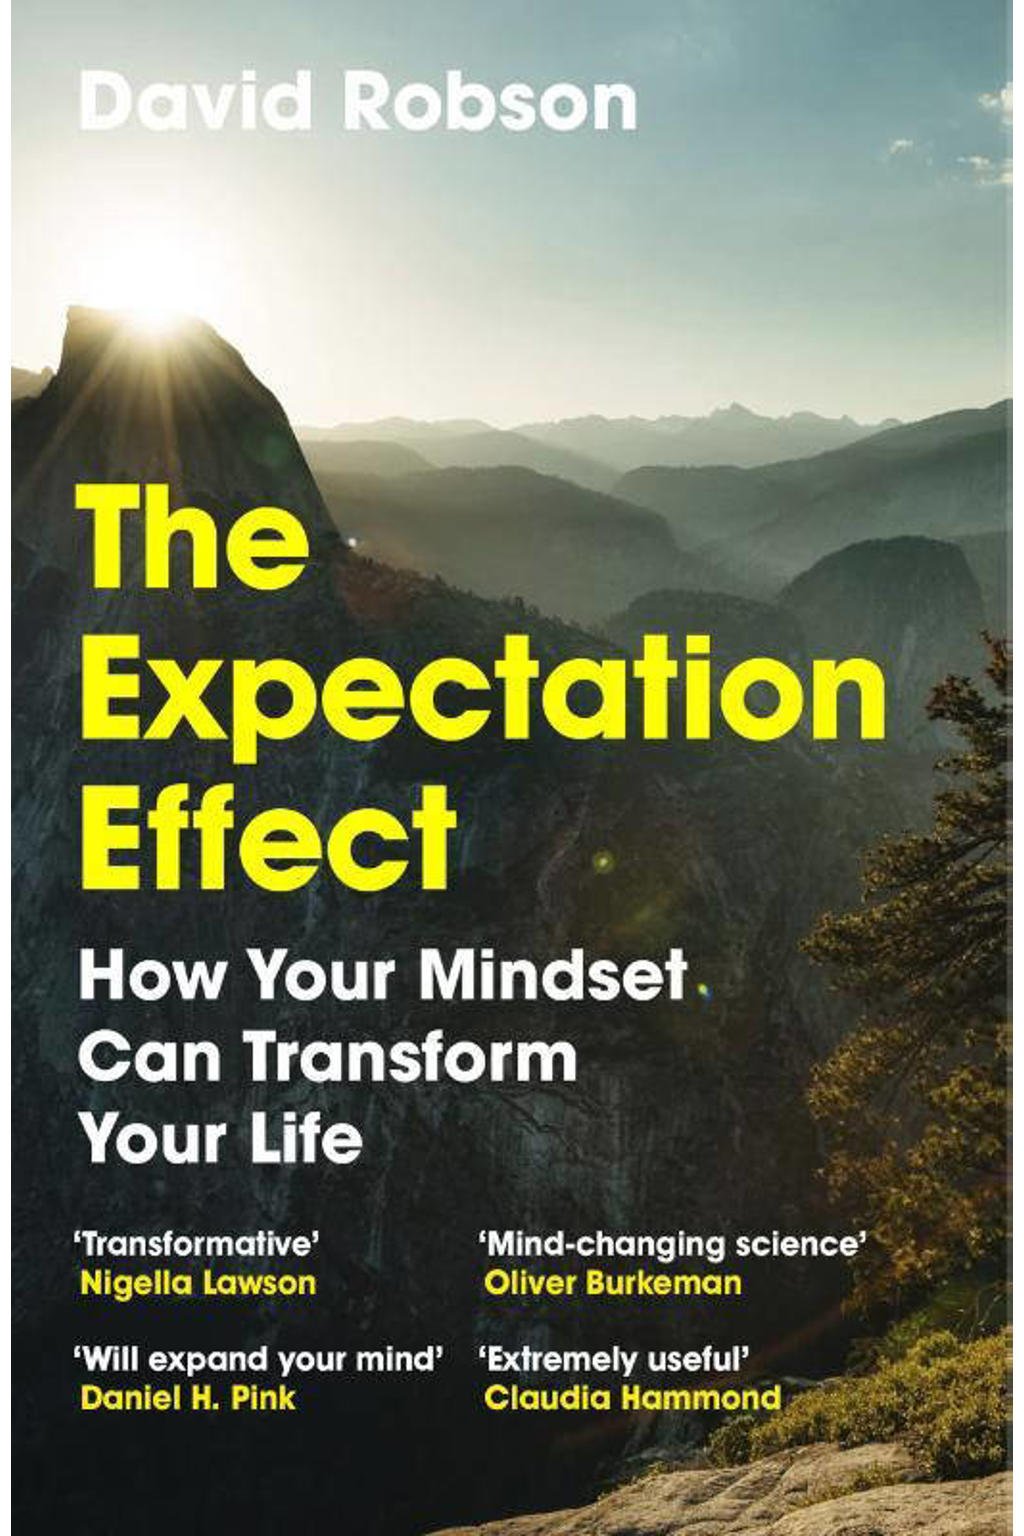 The Expectation Effect - David Robson